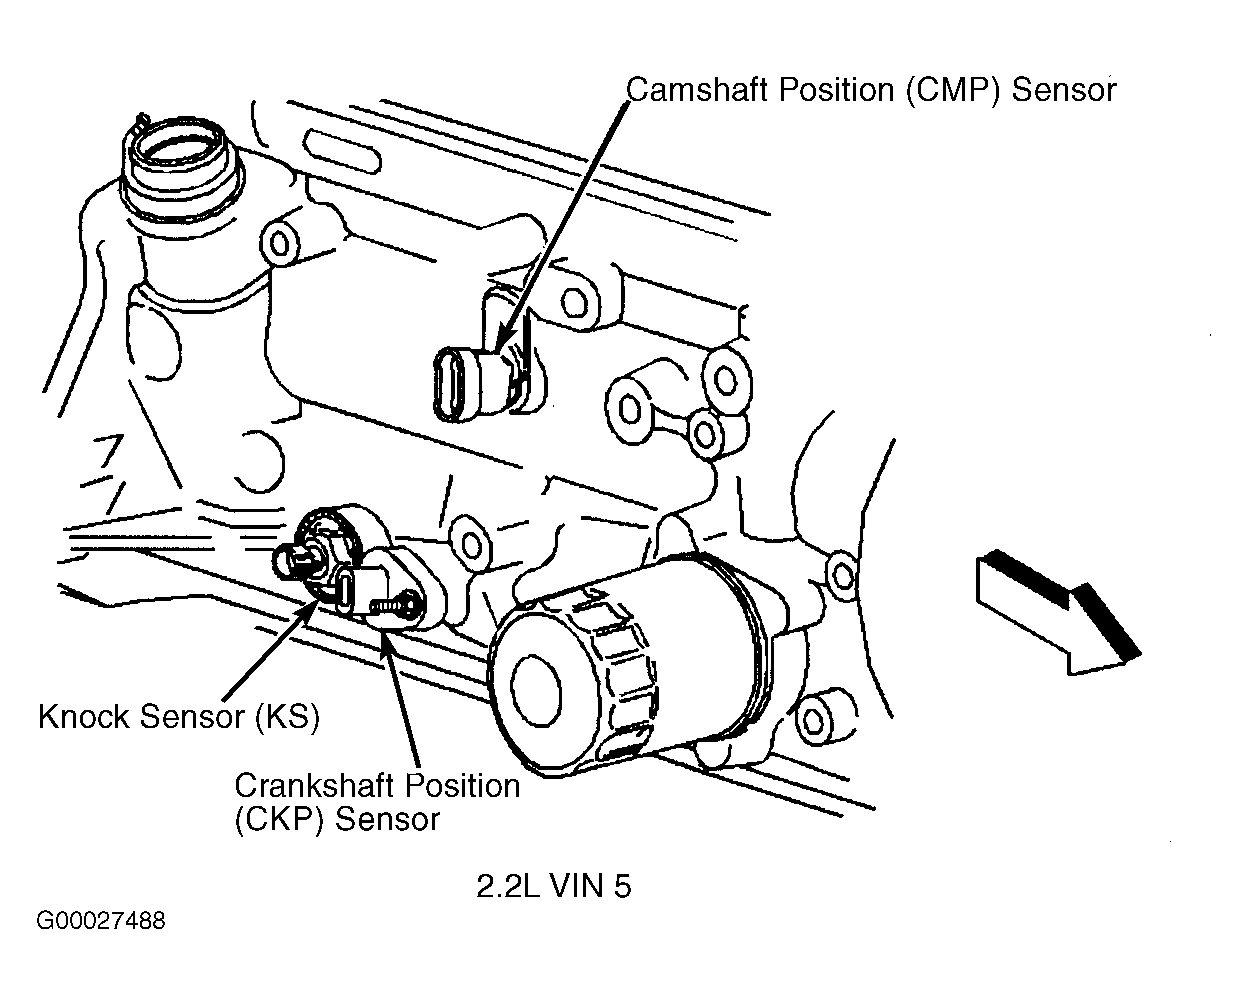 Chevrolet S10 Pickup 2003 - Component Locations -  Right Side Of Engine (2.2L VIN 5)